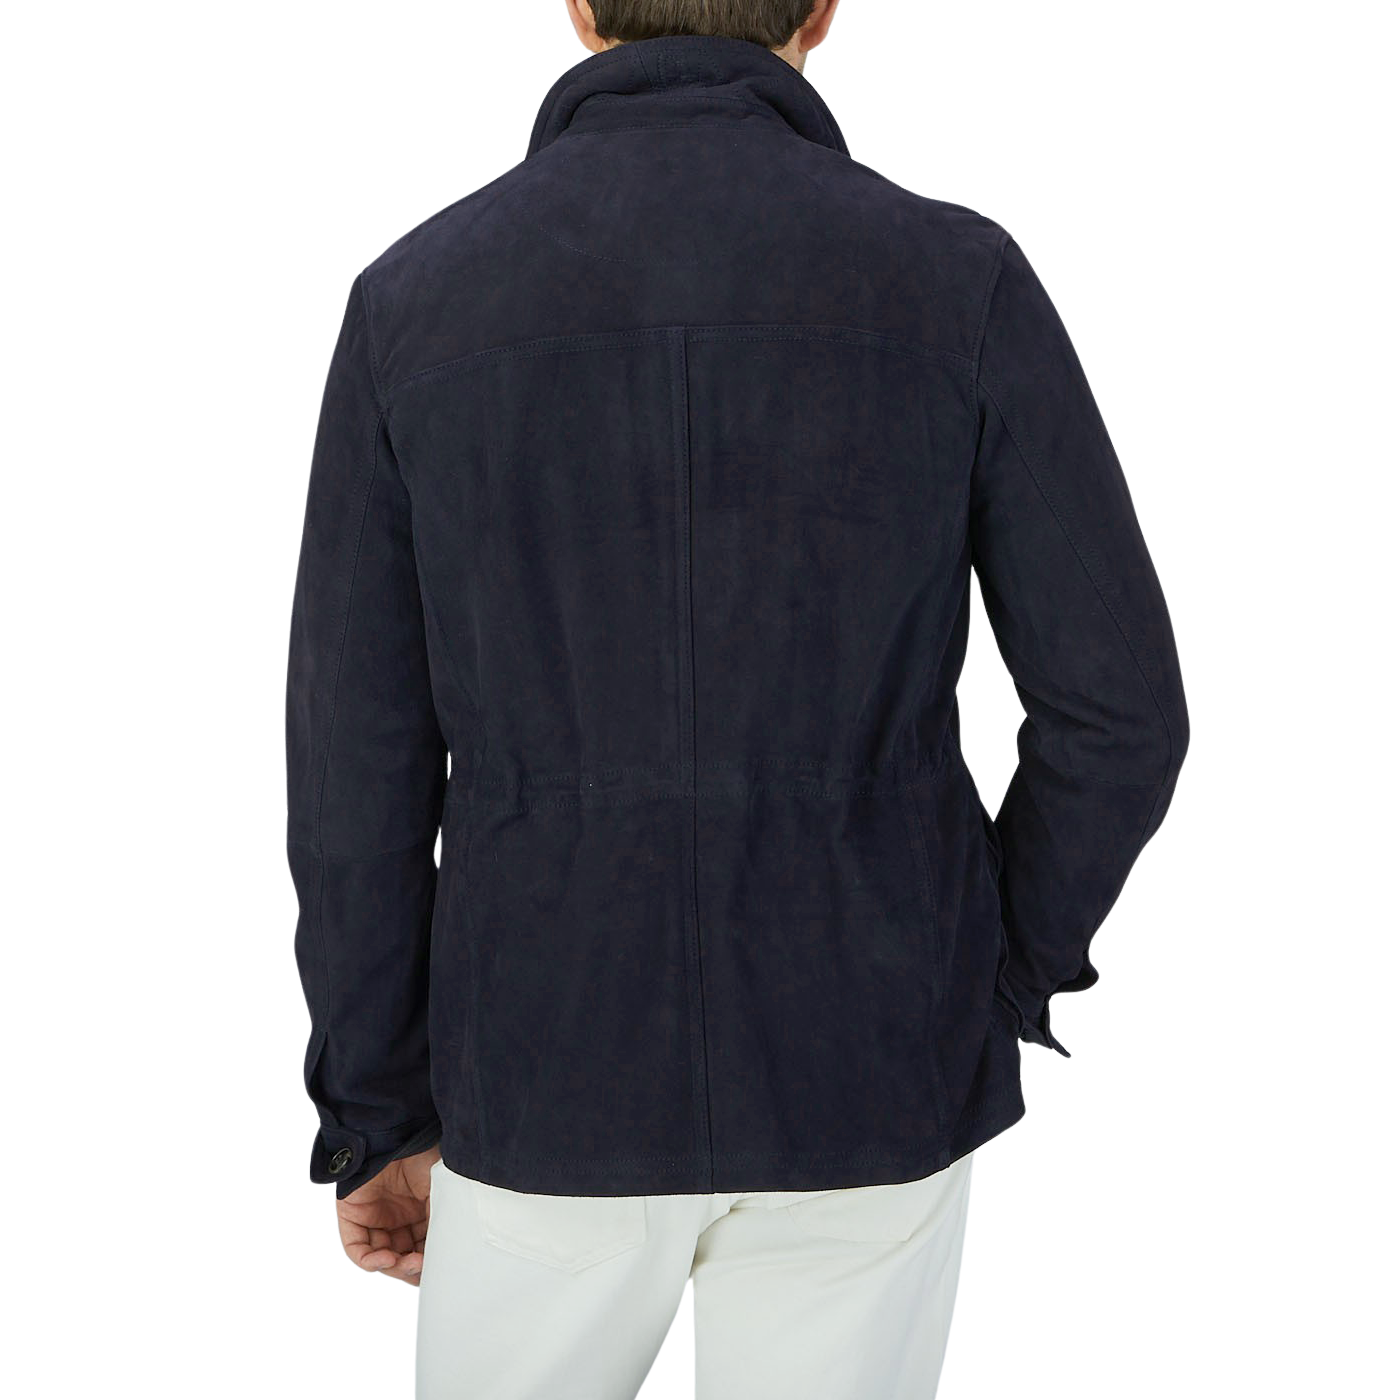 The back view of a man wearing a Werner Christ Navy Suede Anton Leather Jacket.